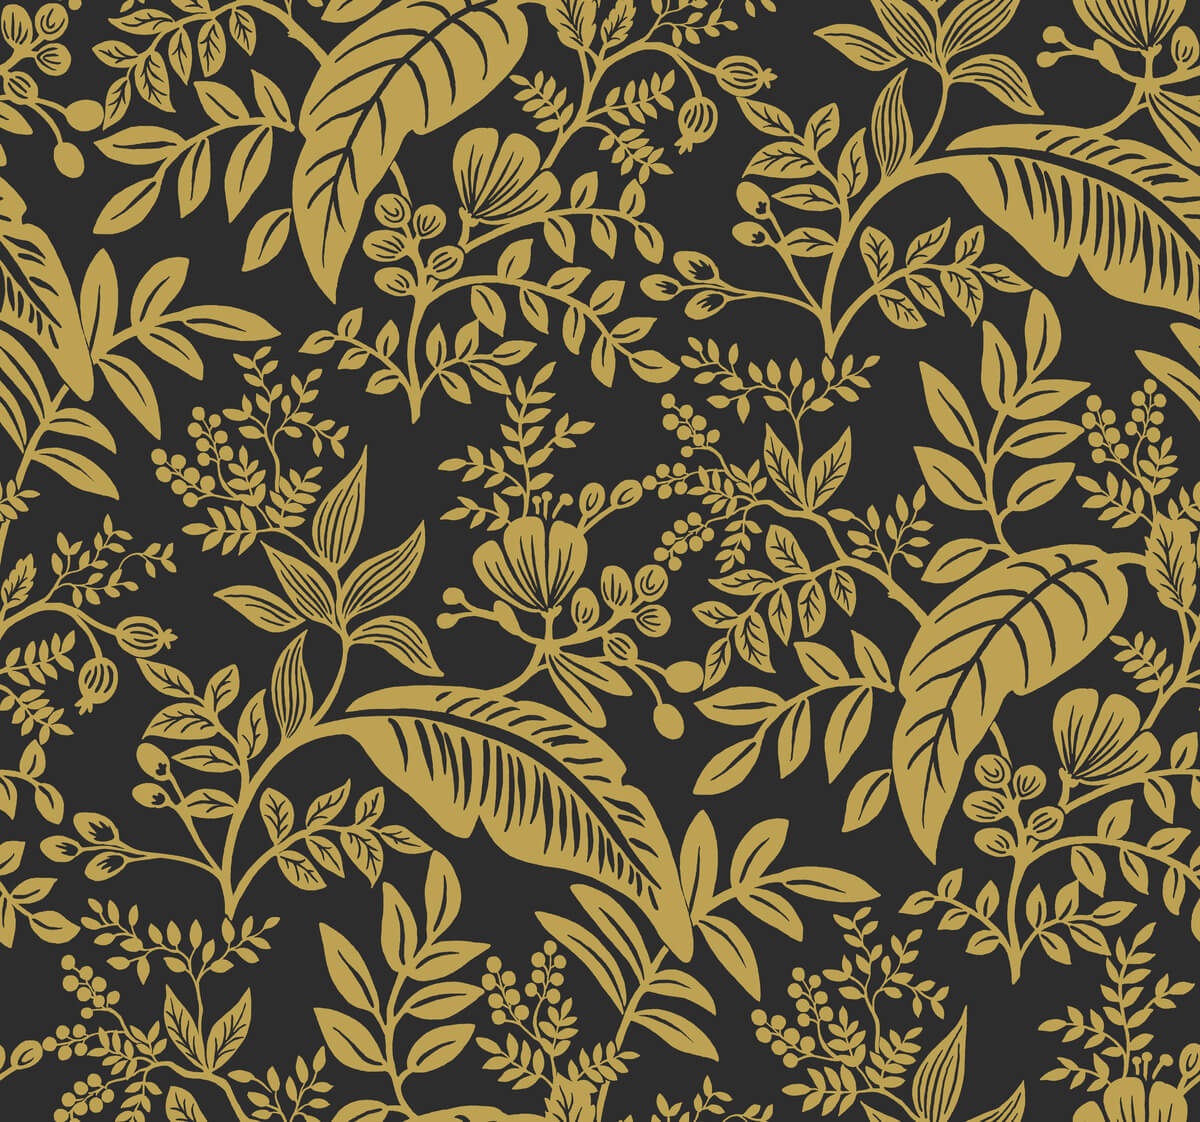 Rifle Paper Co. Canopy Wallpaper - Black & Gold